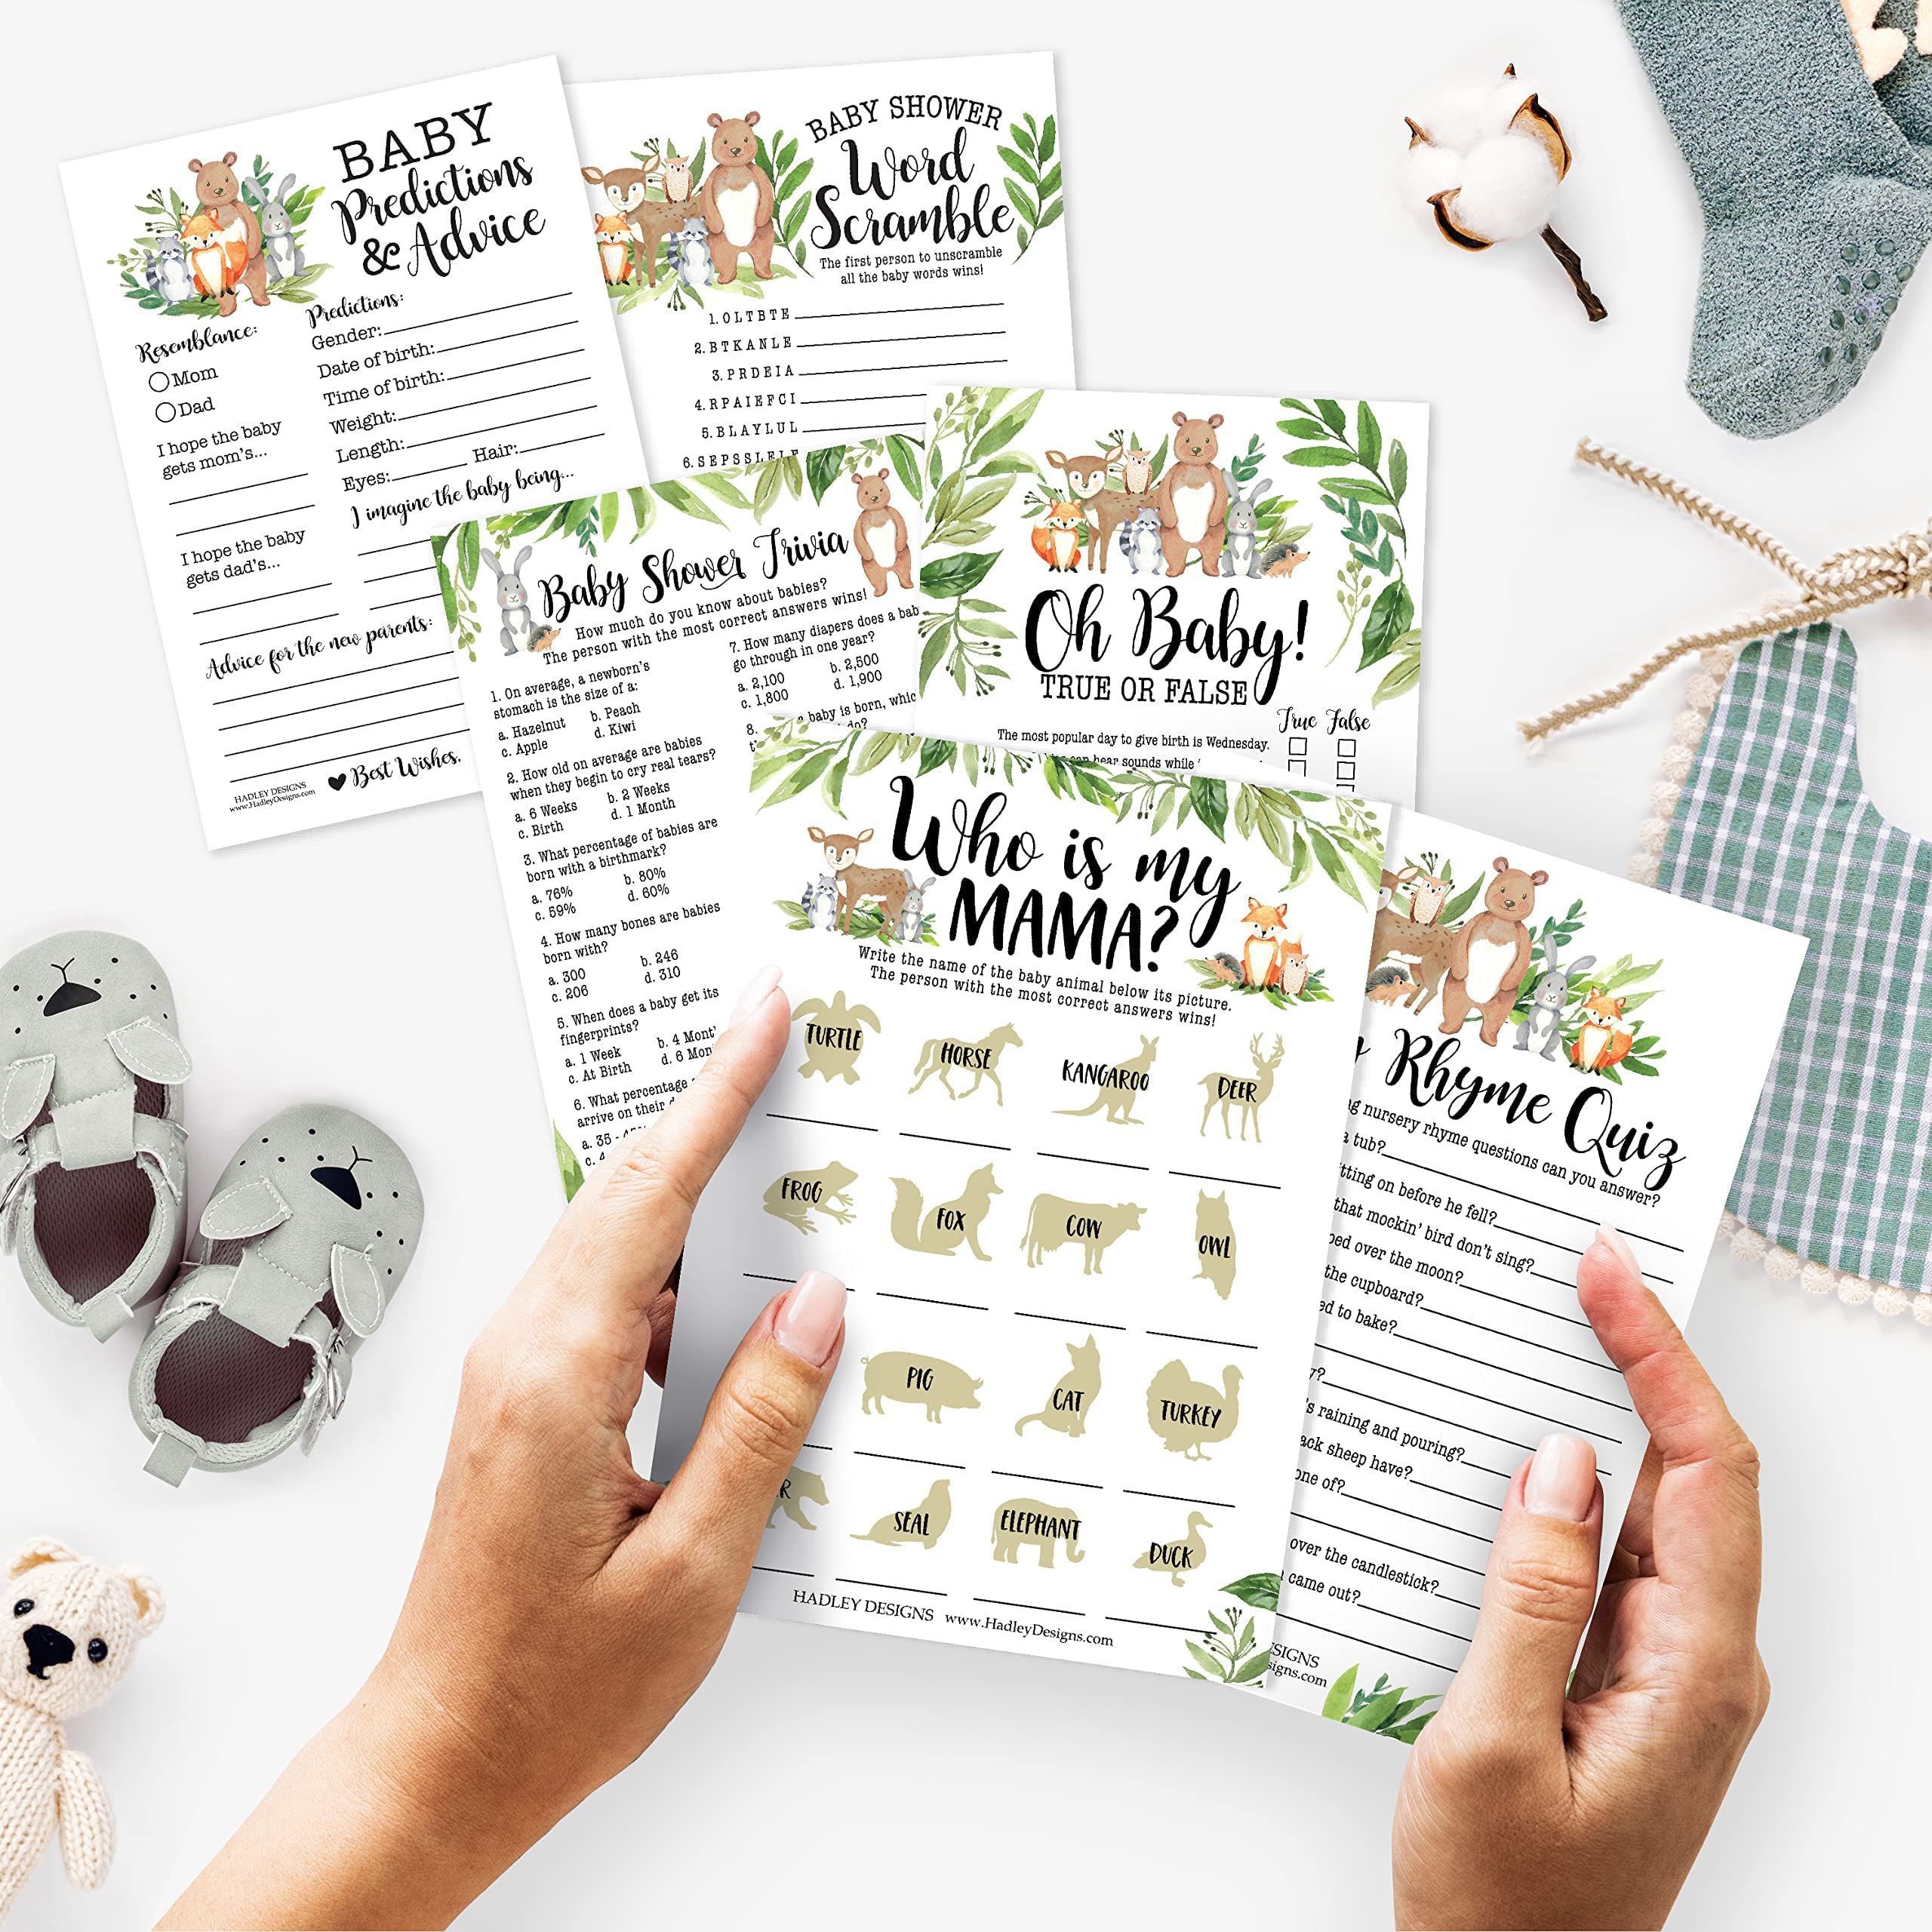 50 Woodland Baby Prediction And Advice Cards, Trivia Games, etc, 25 Baby Animal Matching, Nursery Rhyme Game - 6 Double Sided Cards Baby Shower Games Funny, Baby Shower Ideas Baby Sprinkle Games